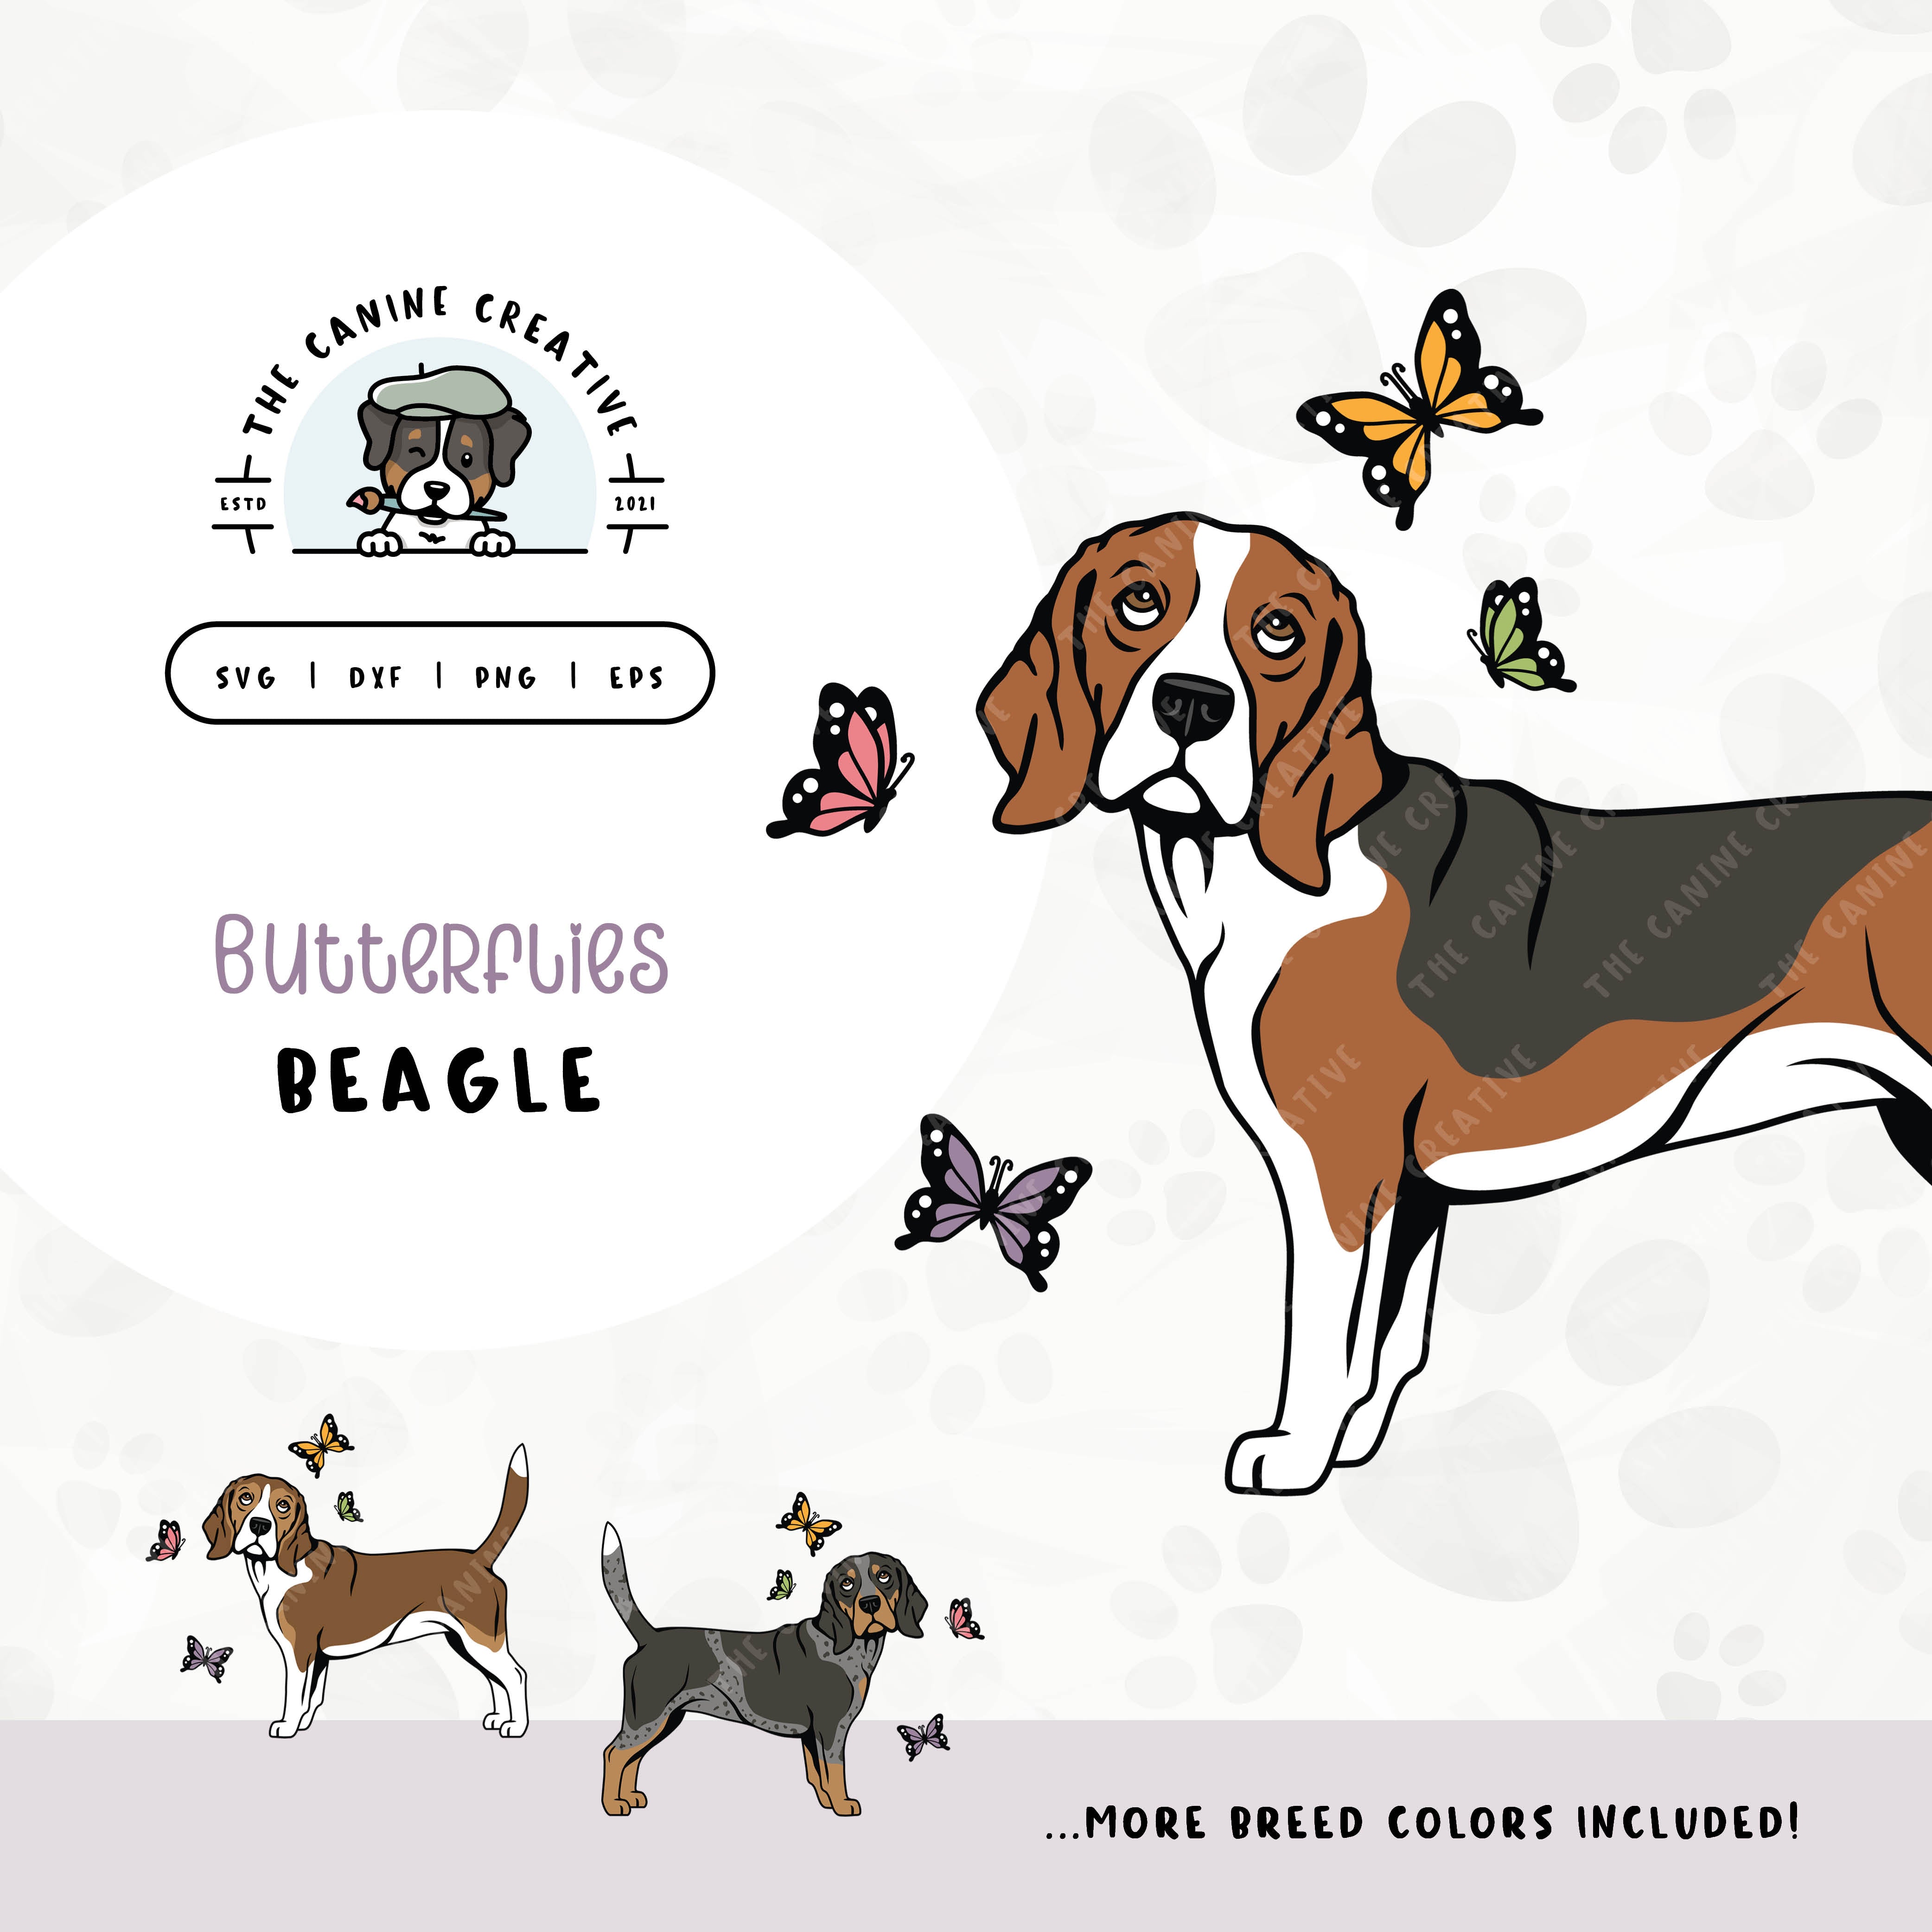 This springtime illustration features a Beagle among colorful butterflies. File formats include: SVG, DXF, PNG, and EPS.